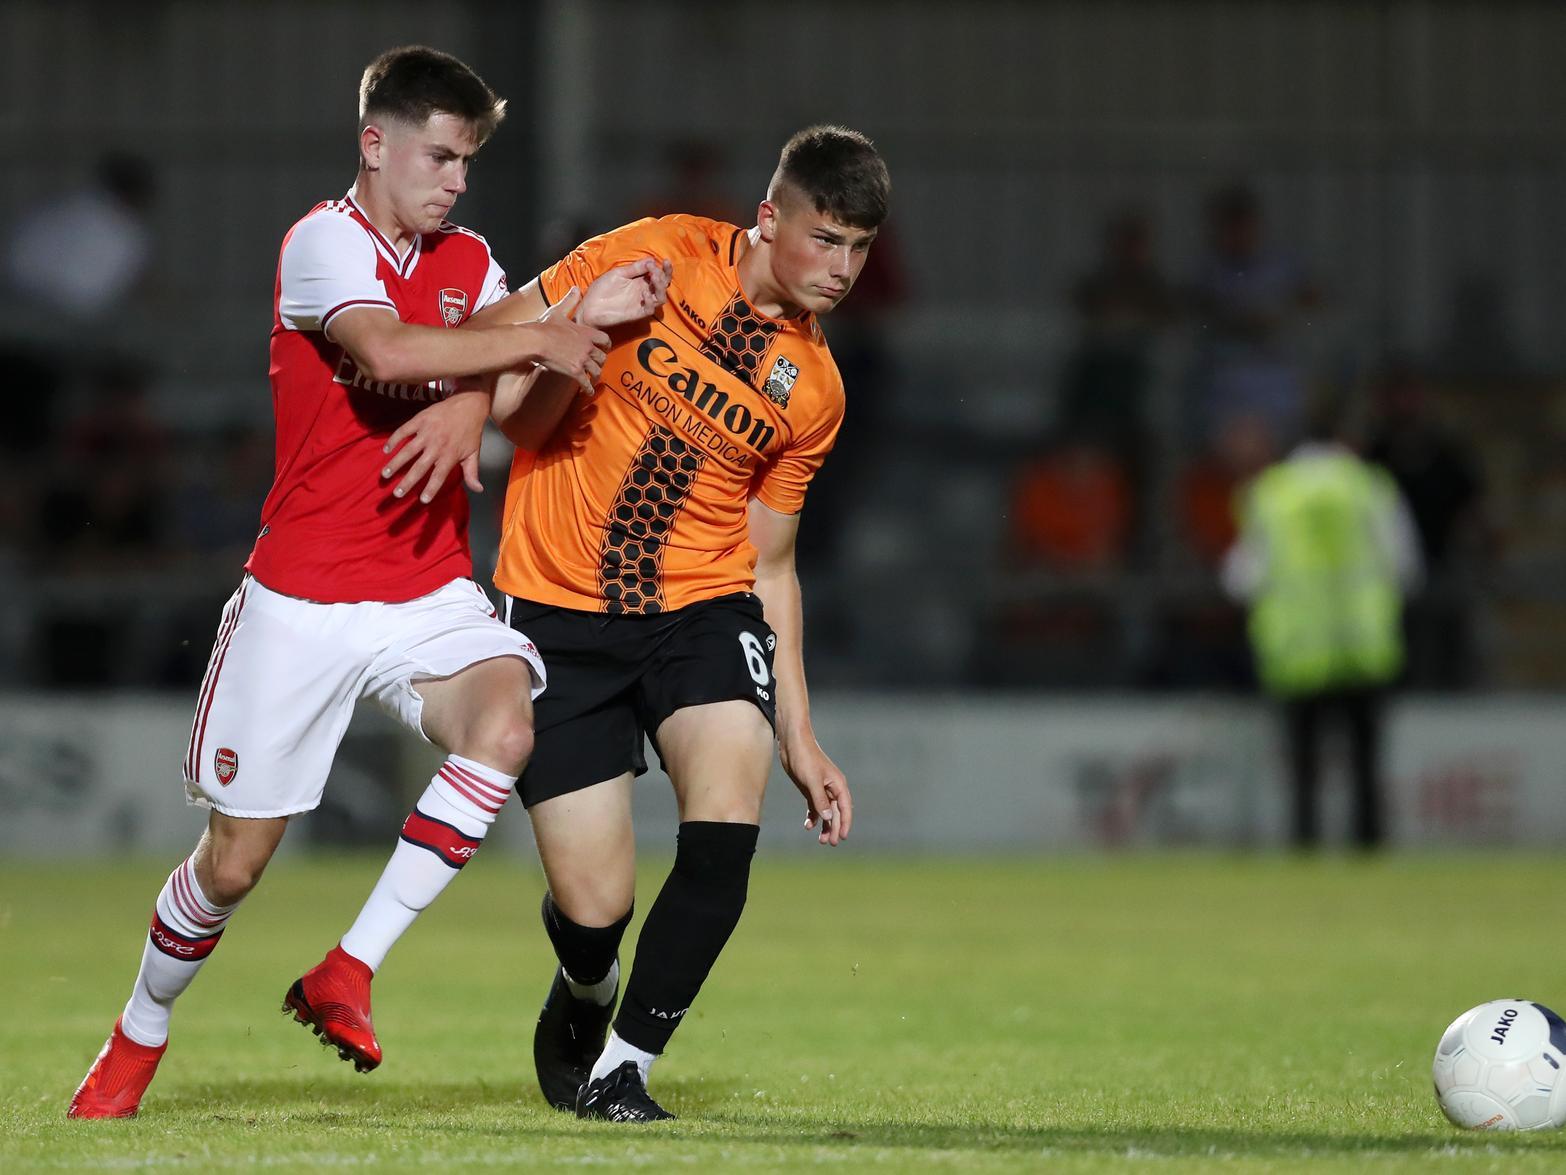 Peterborough United have completed the signing of Barnet midfielder Jack Taylor on a long-term contract for an initial fee of 500k rising to 1m. (Various)